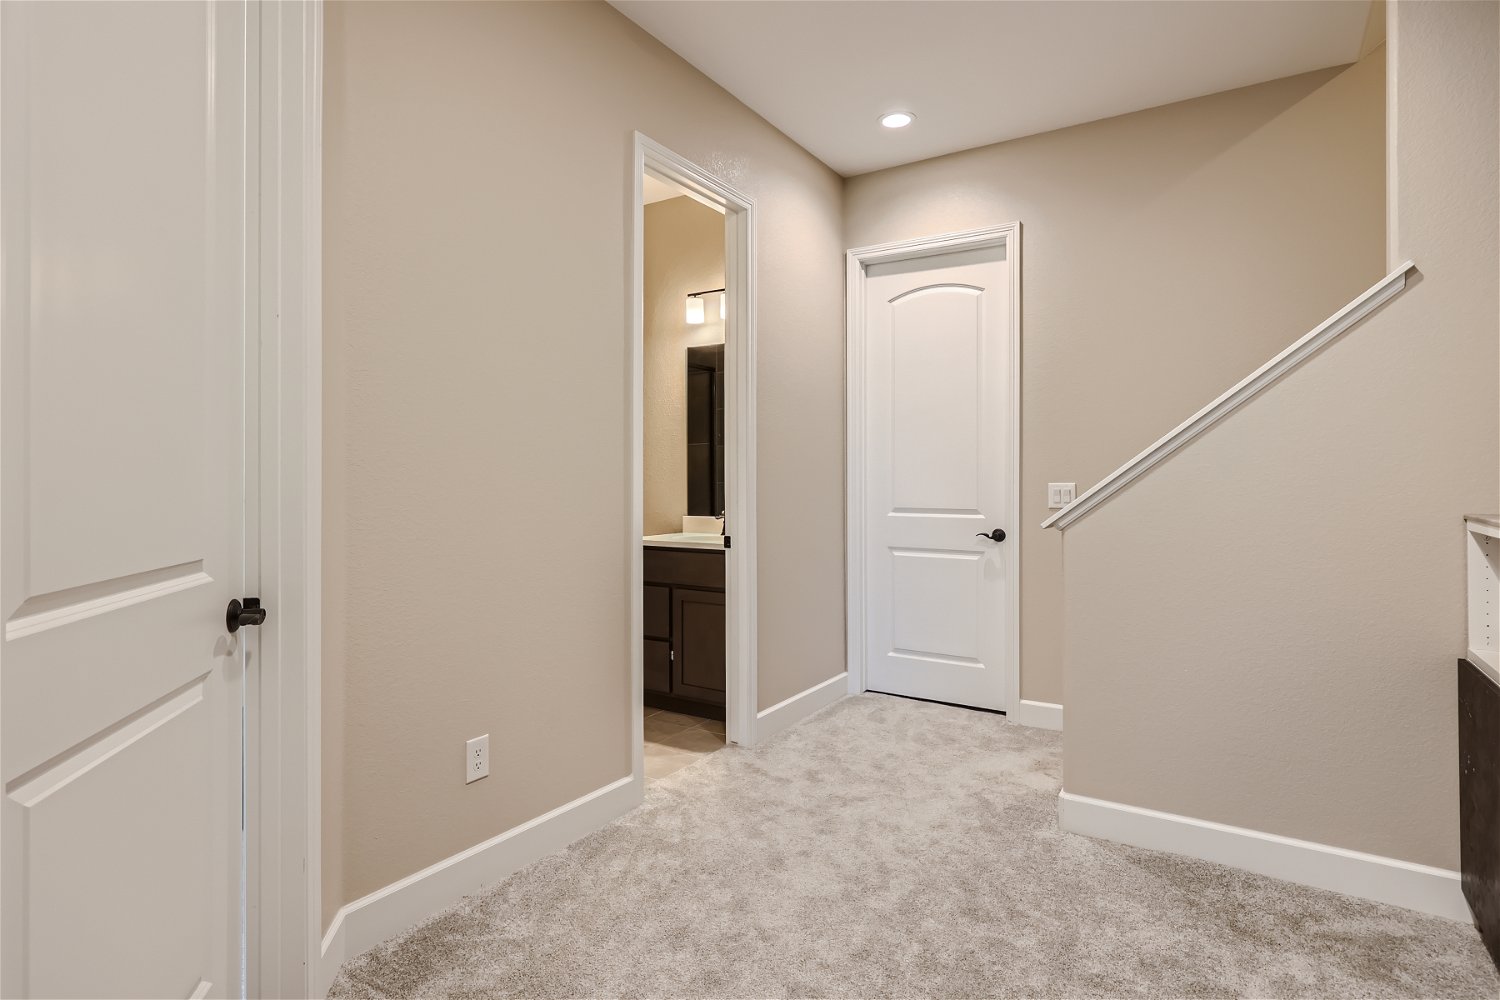 Featured Basement Finish: Game On!